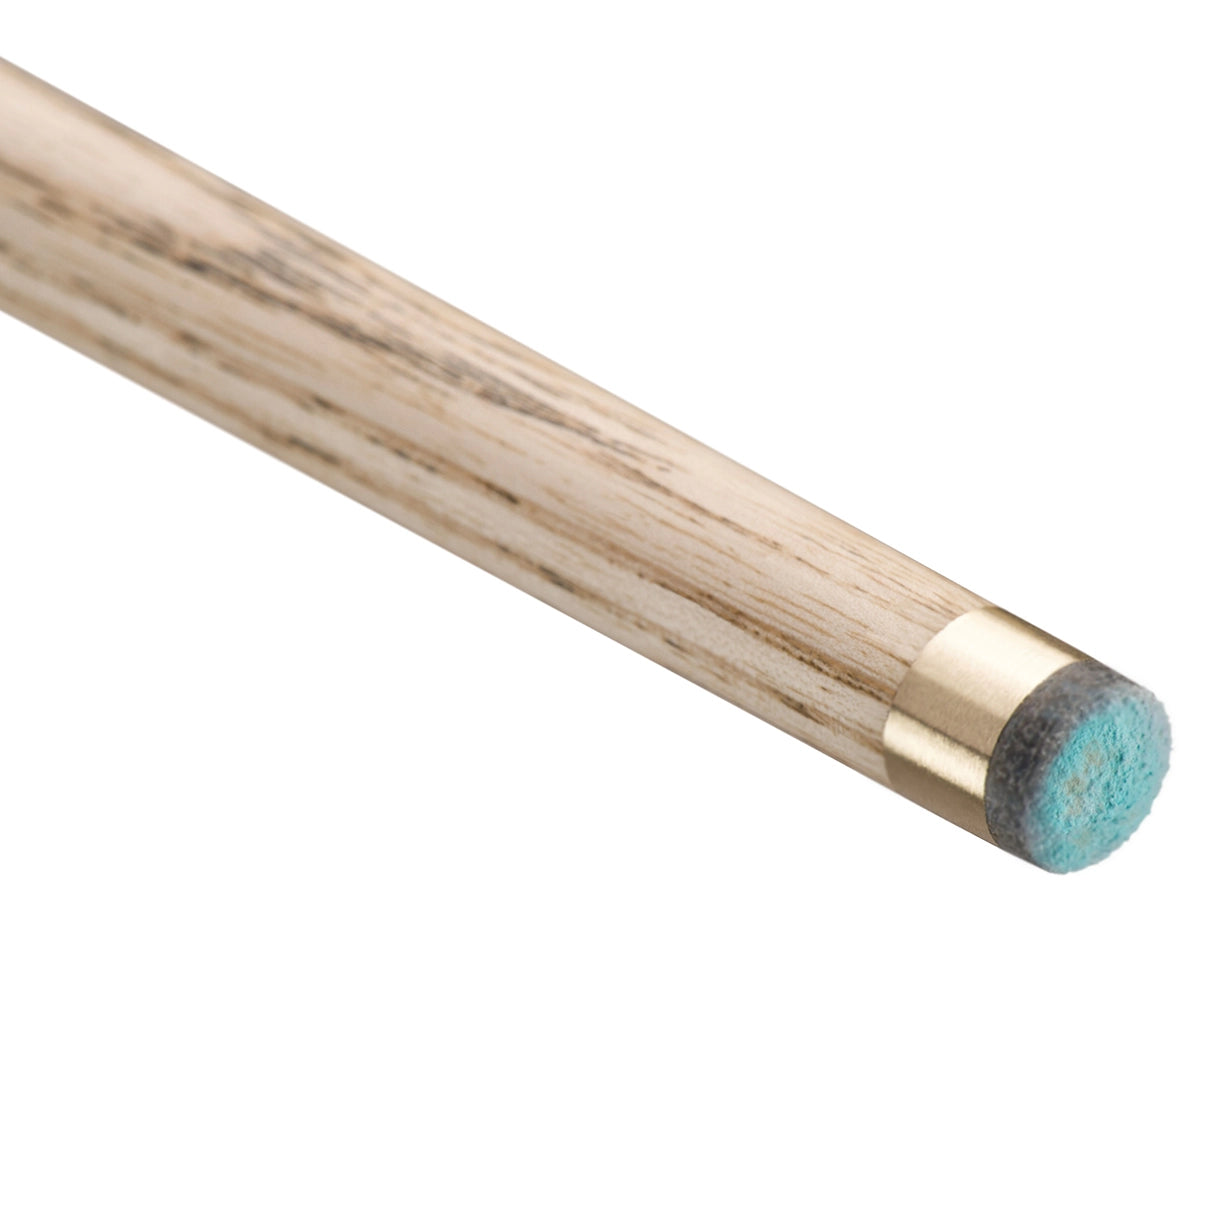 Peradon Clifton 3/4 Jointed Snooker Cue. Tip view